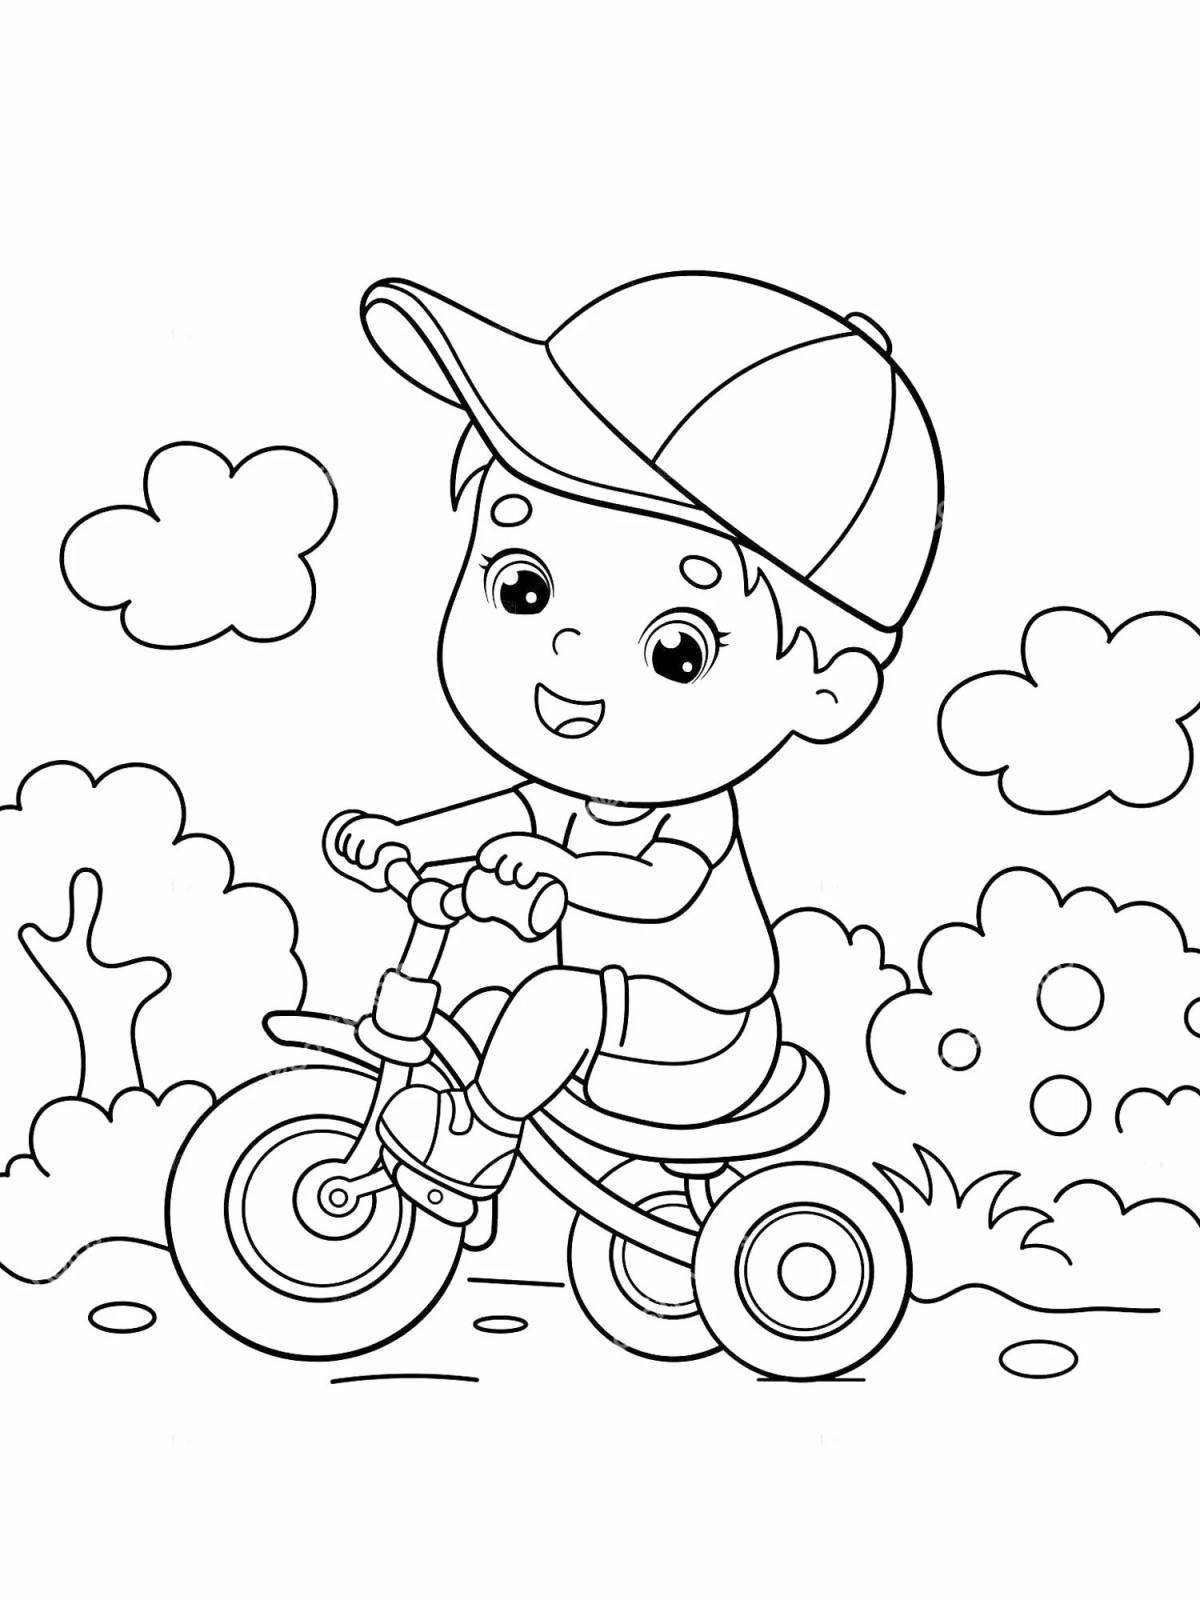 Creative coloring book for boys and girls